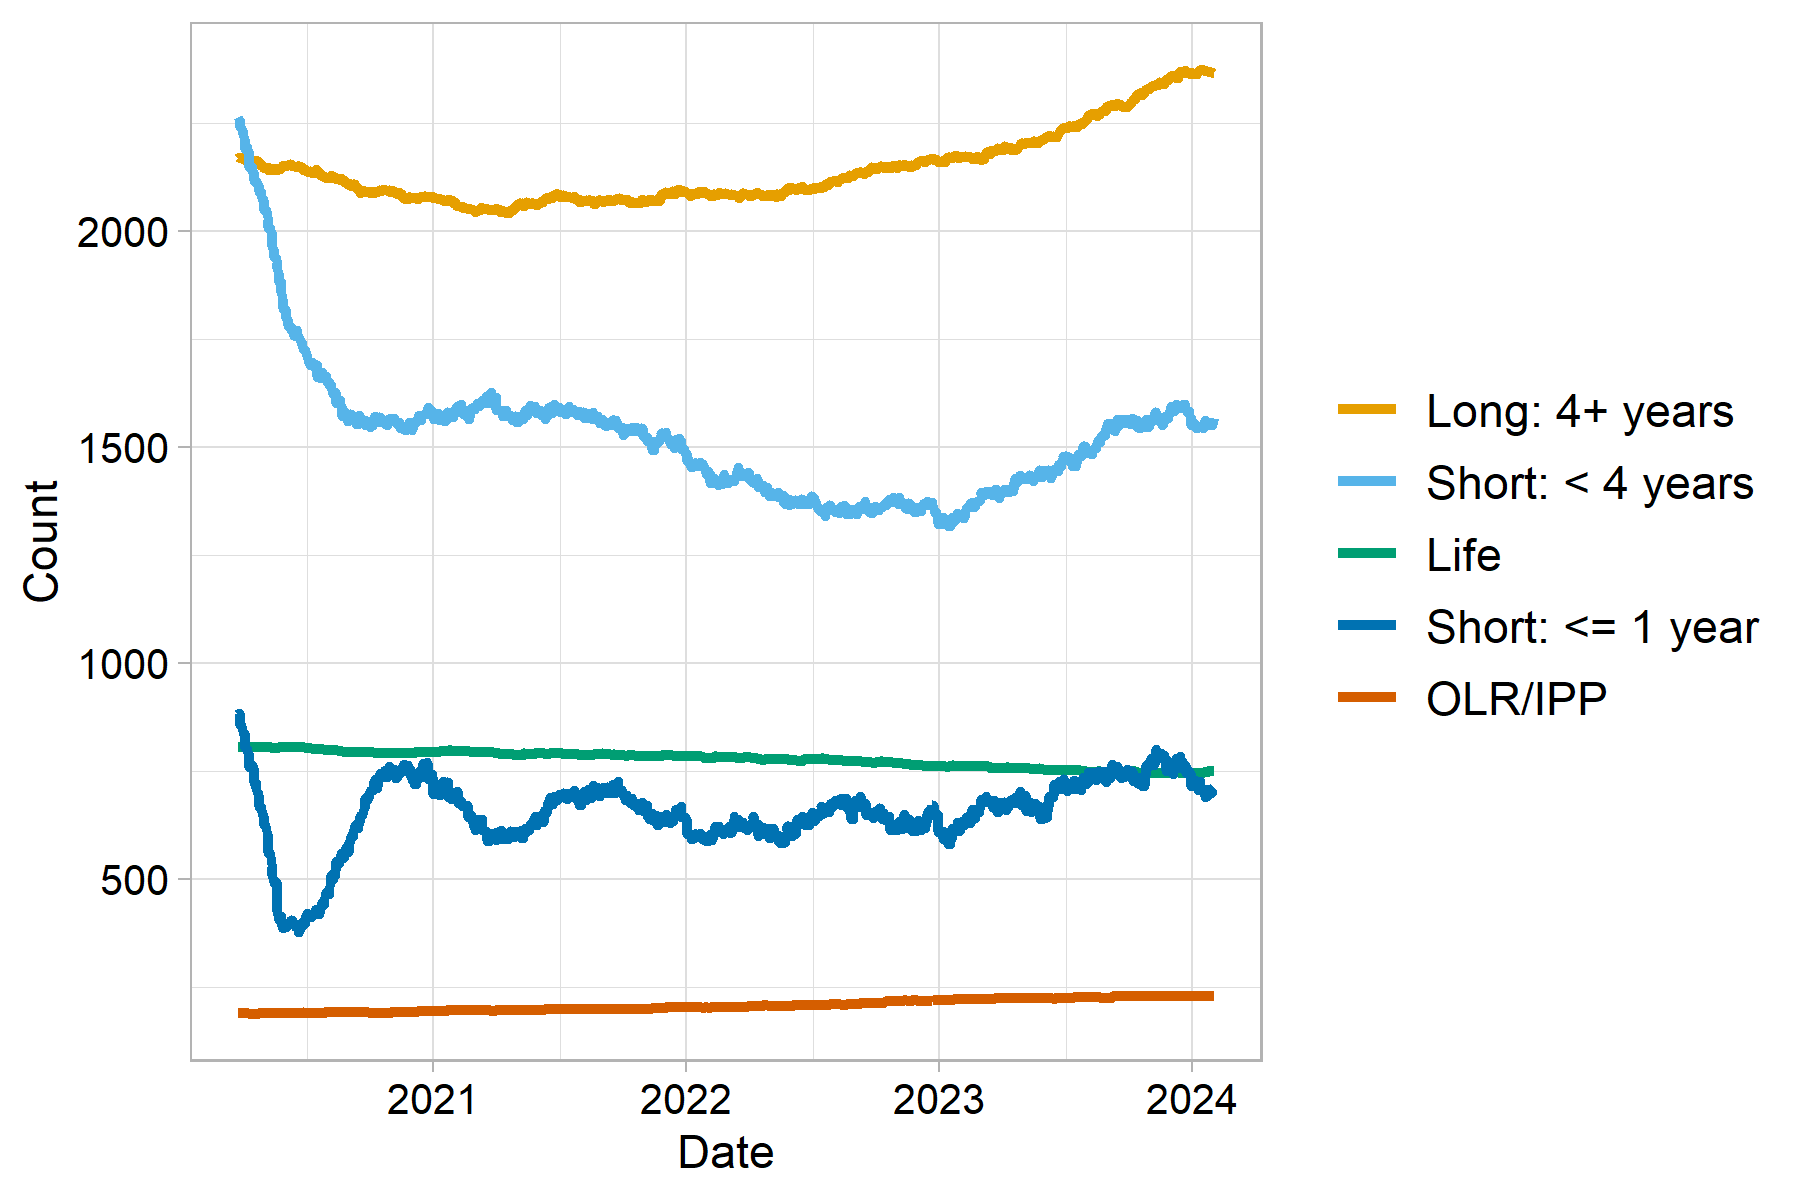 The sentenced population broken into overall sentence bands. The highest line to lowest line categories Long: 4 years plus (highest line), Short: less that 4 years, Life, Short: one year or less, Orders of Lifelong Restriction (lowest line). The trends are described in the body text. Last updated February 2024. Next update due March 2024.